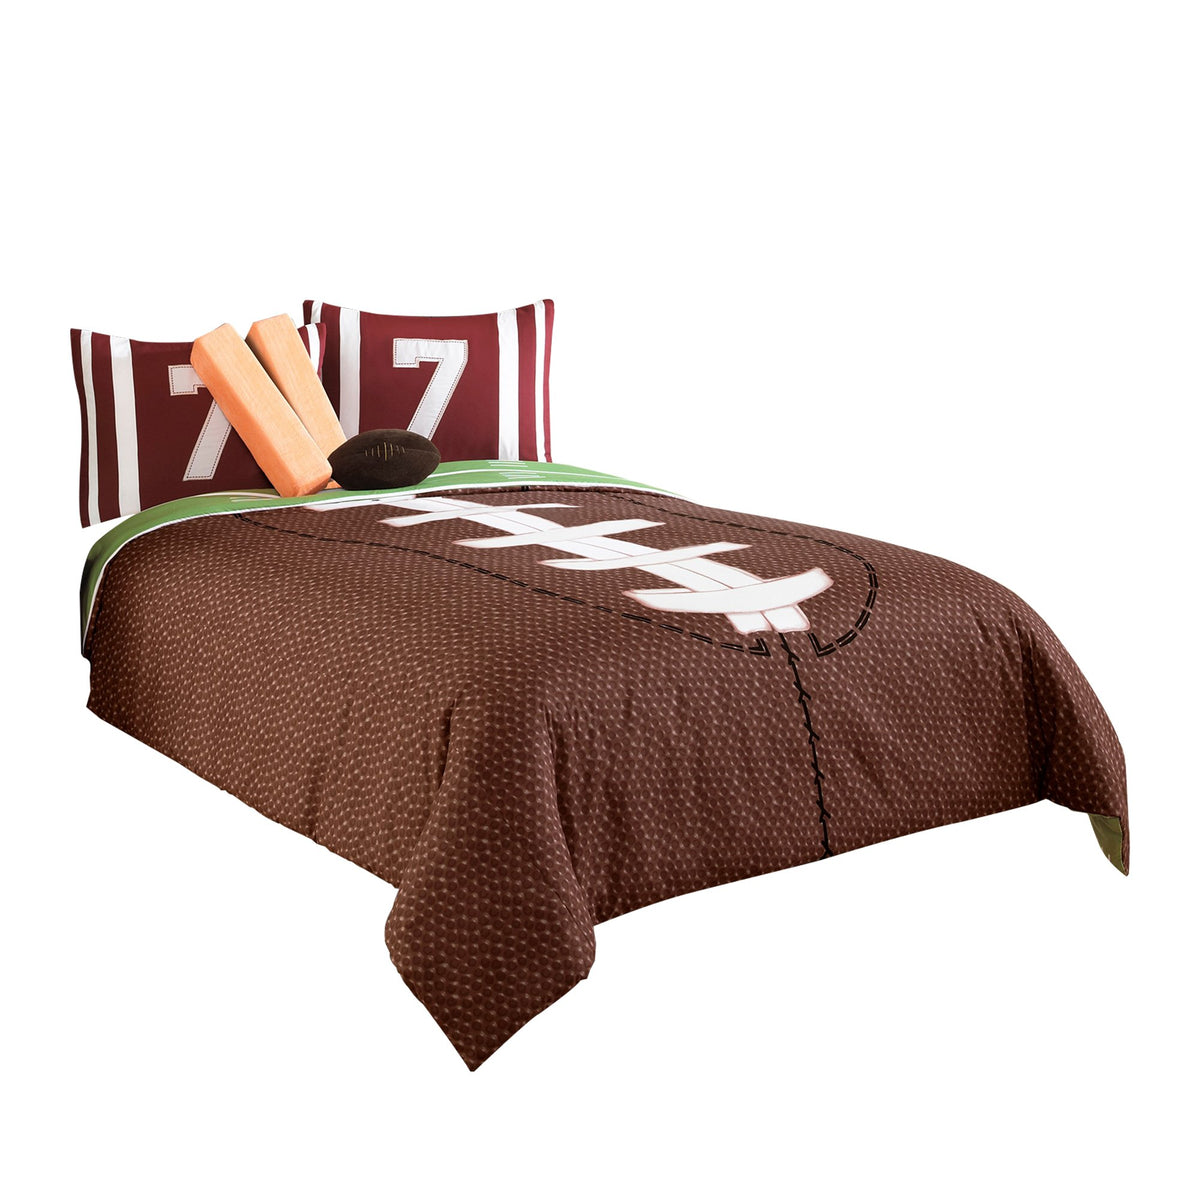 5 Piece Twin Comforter Set with Football Field Print, Brown and Green - BM225153